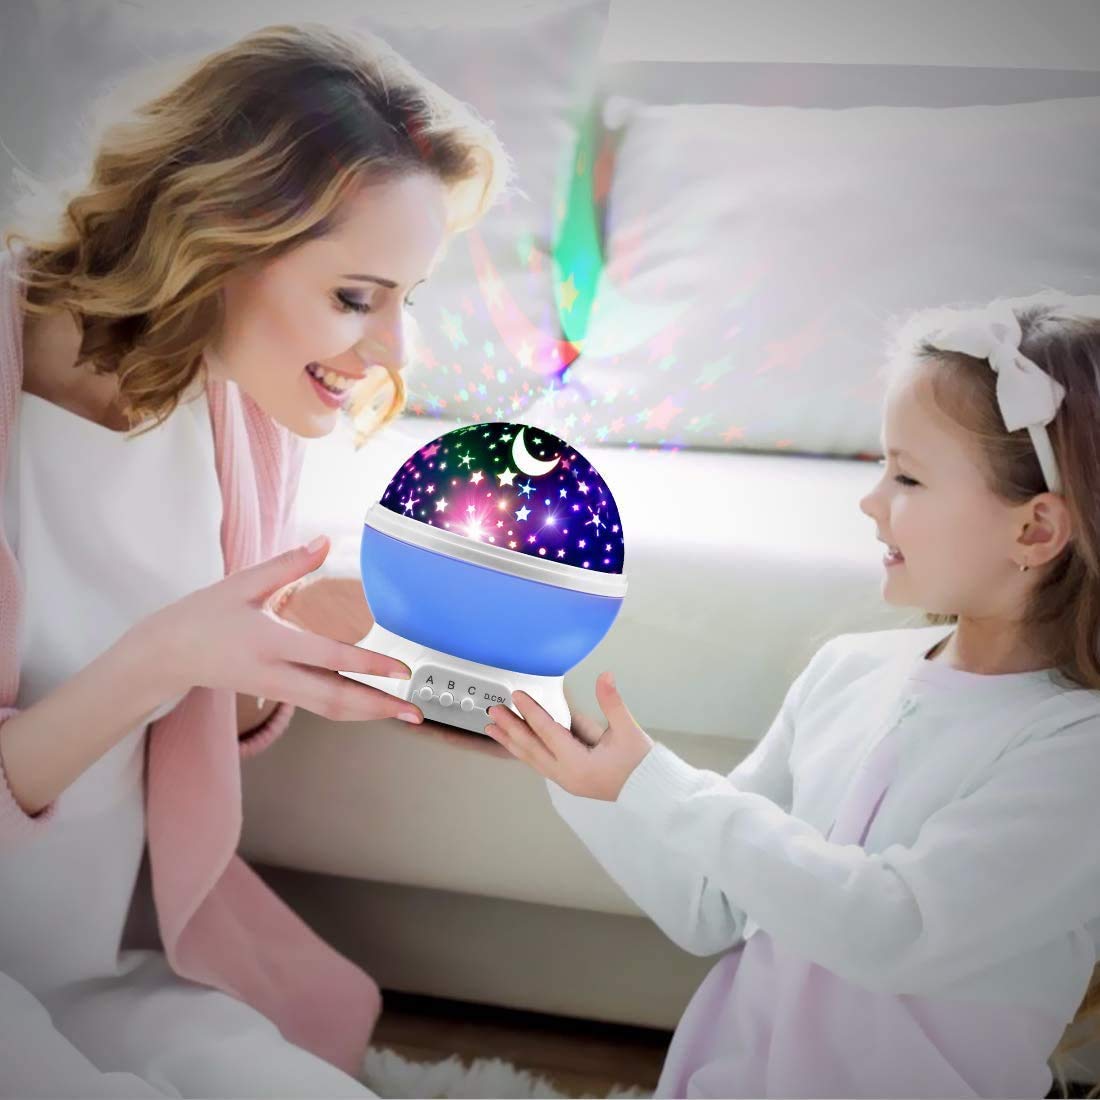 LED Star Light Cosmos Projector Galaxy Night Lamp, Kids Room Lights, Star Master Dream Rotating Projector Lamp for Bedroom, Decoration, 360 Degree Rotating Moon Sky Romantic Gifts